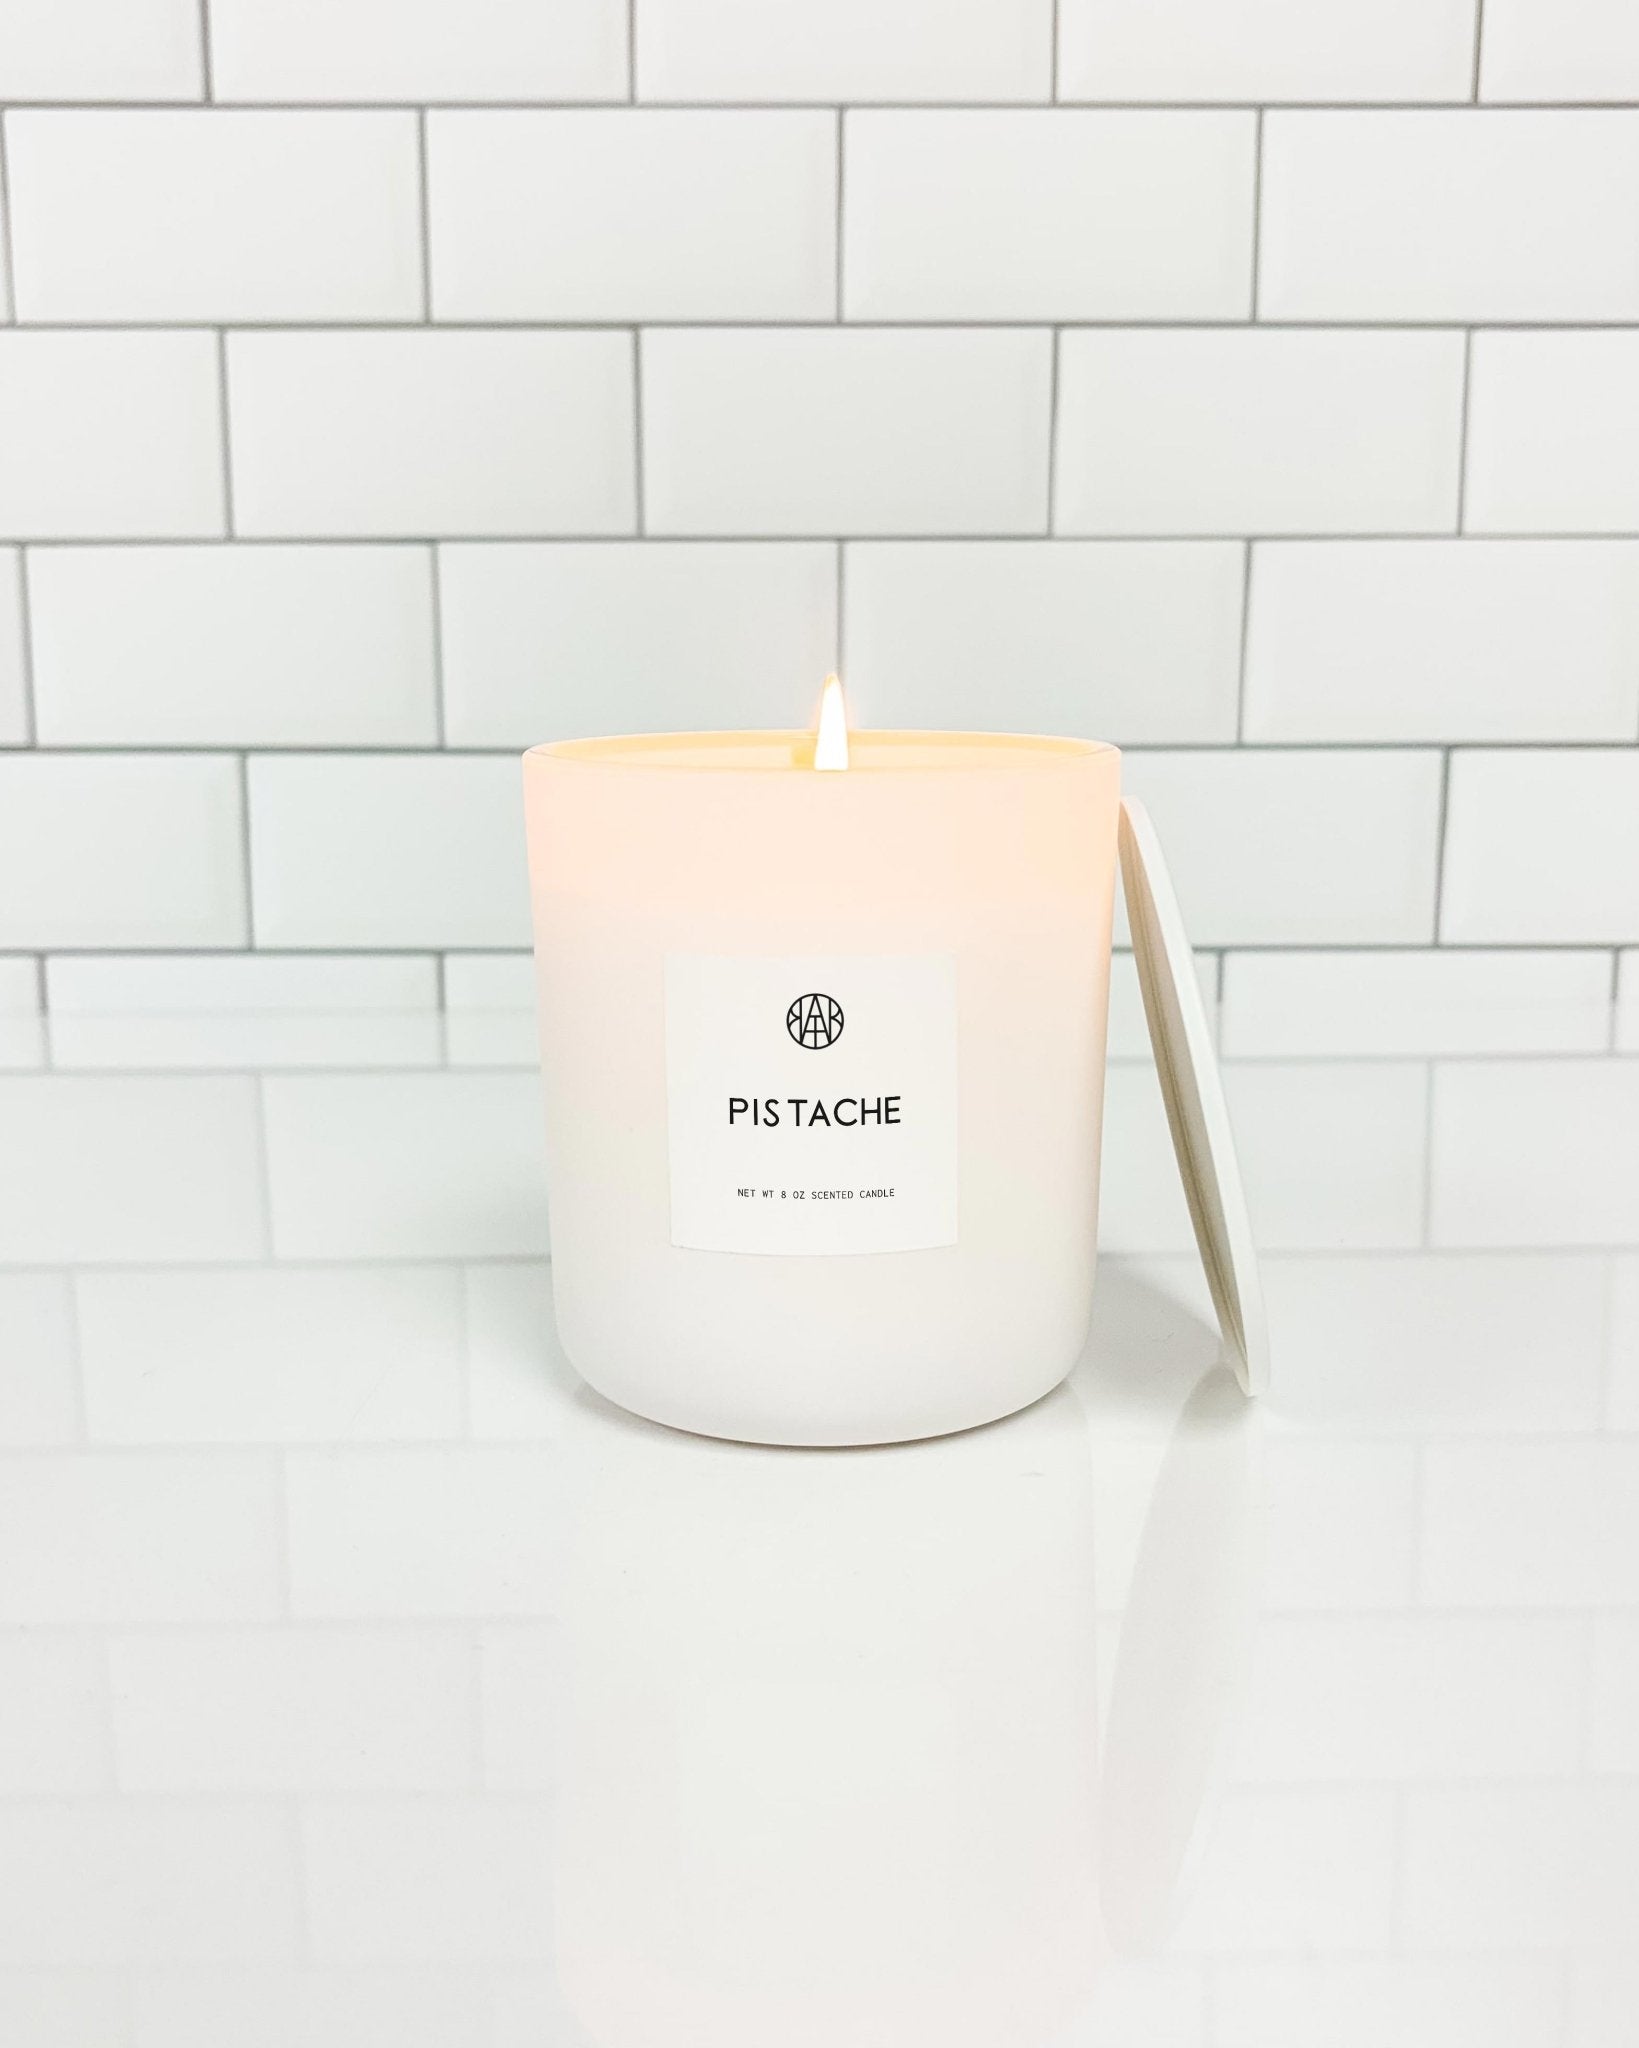 PISTACHE - Classic Candle - AEMBR - Clean Luxury Candles, Wax Melts & Laundry Care